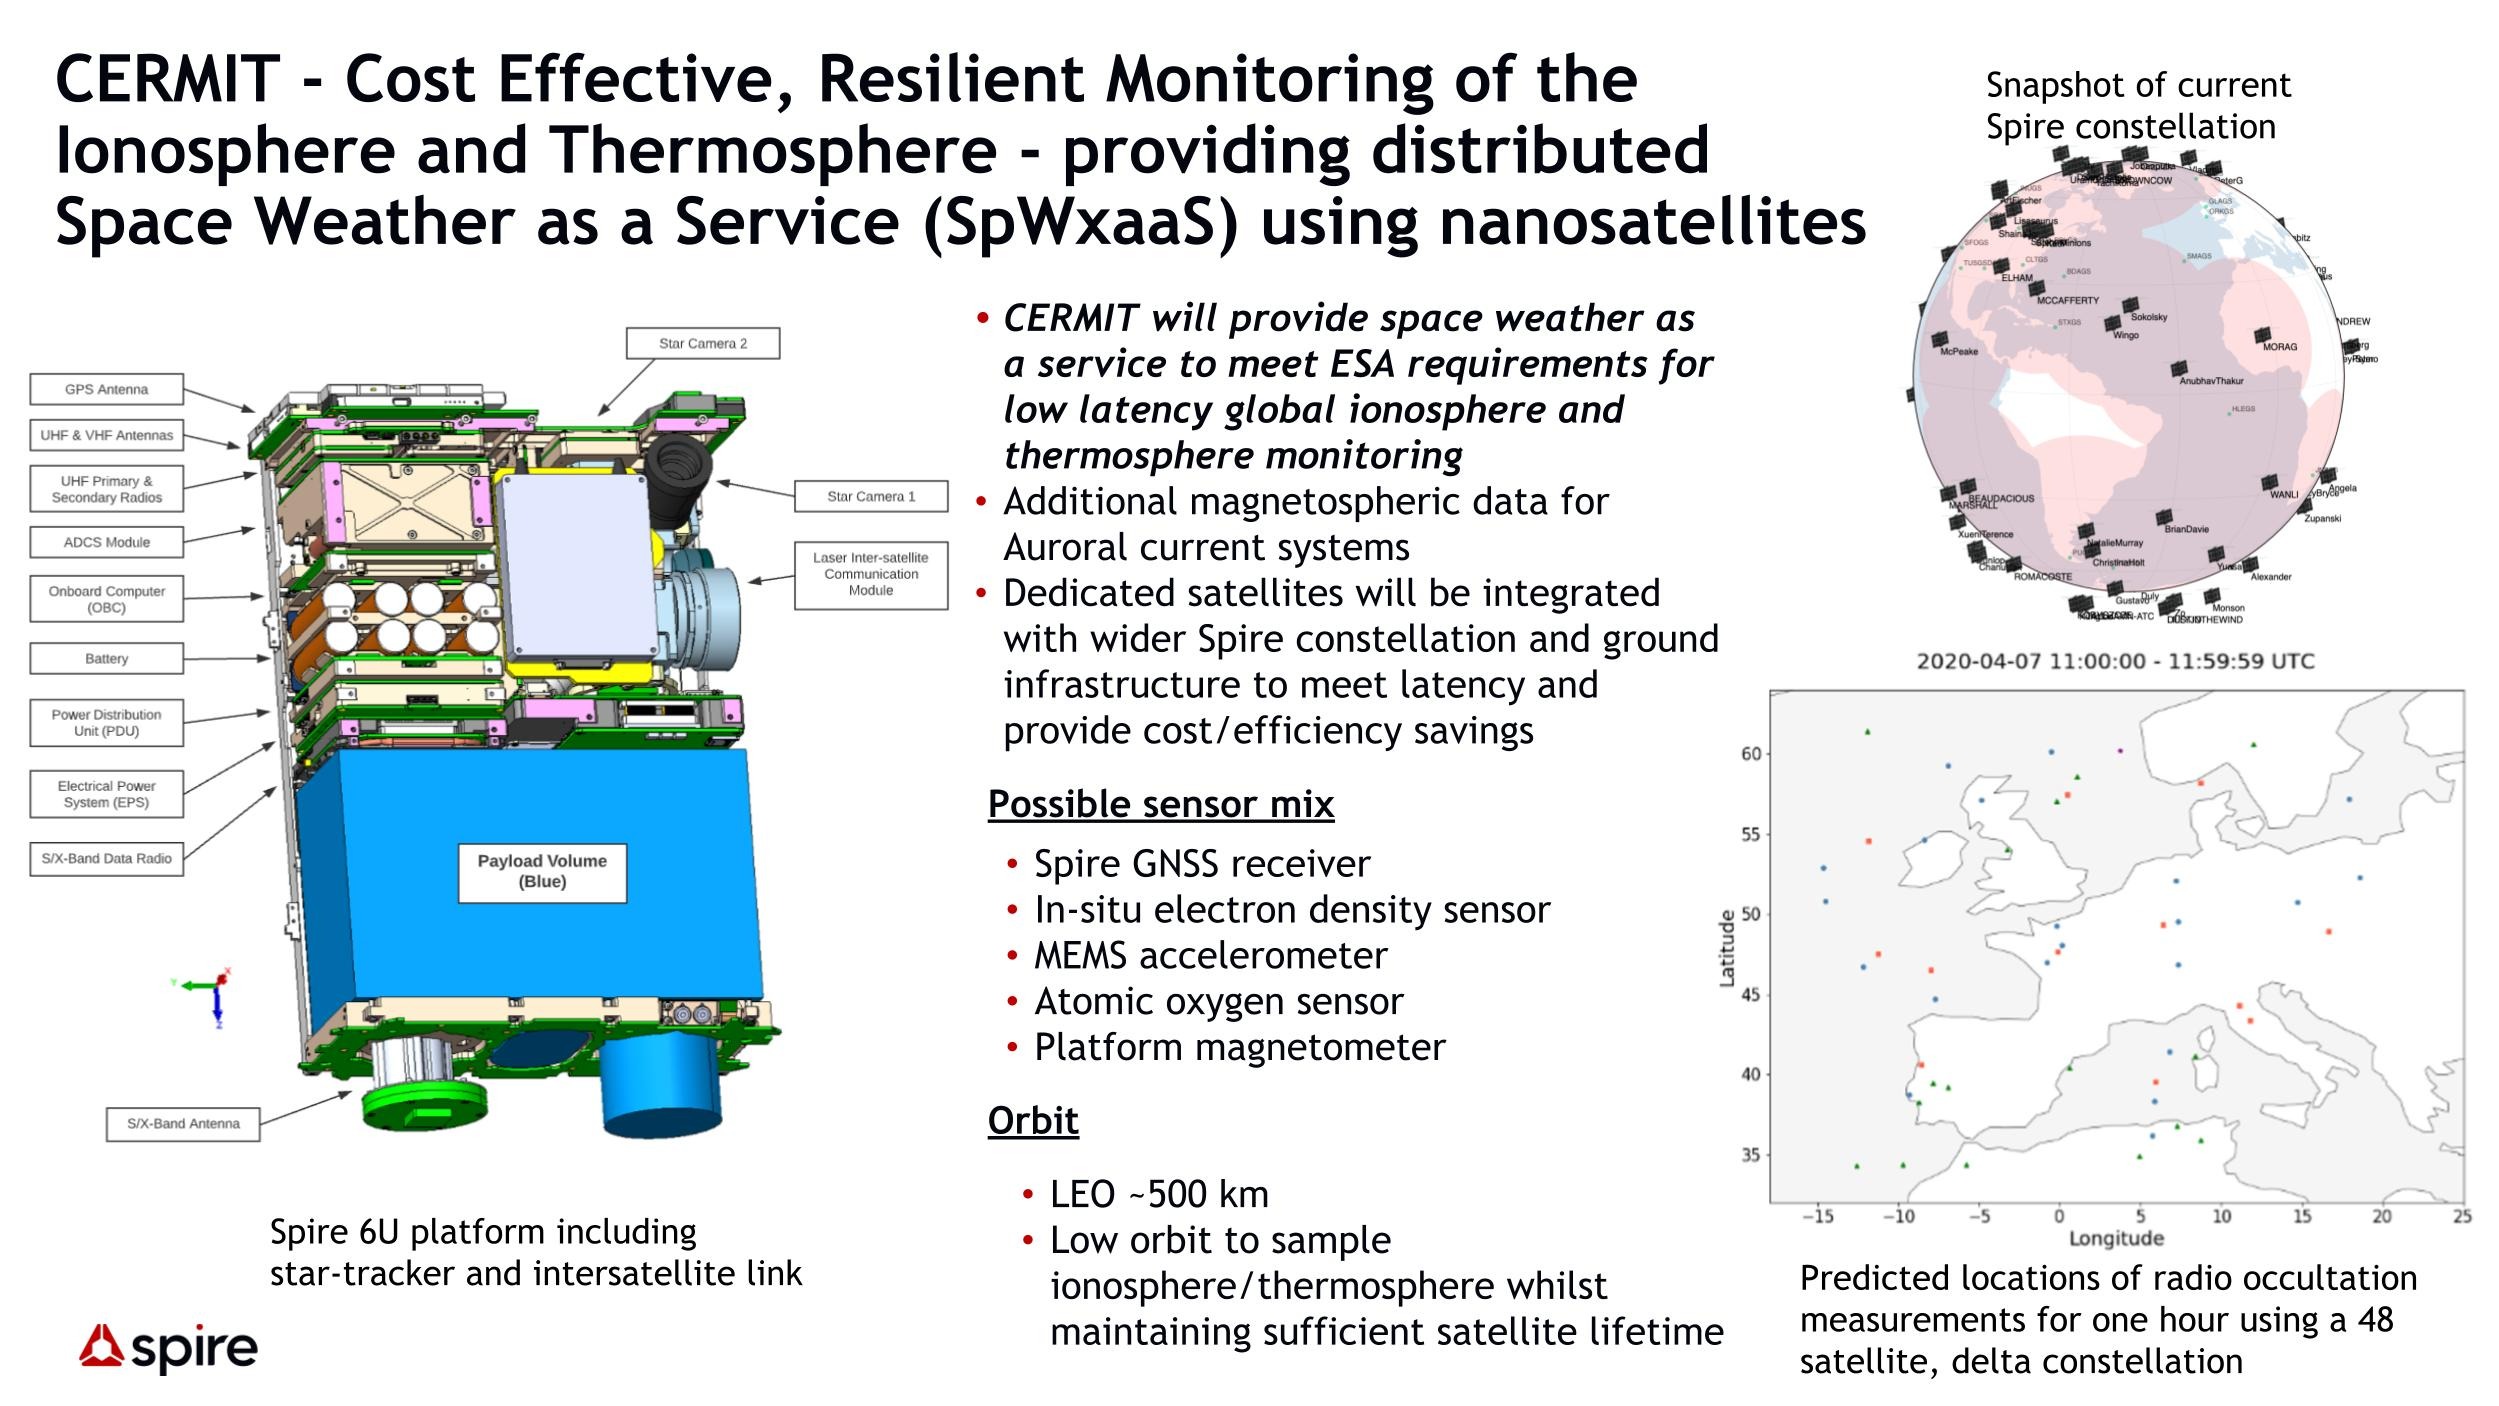 COST EFFECTIVE, RESILIENT MONITORING OF THE IONOSPHERE AND THERMOSPHERE (CERMIT) - PROVIDING DISTRIBUTED SPACE WEATHER AS A SERVICE (SPWXAAS) USING NANOSATELLITES Nanosatellites for Space Weather Monitoring